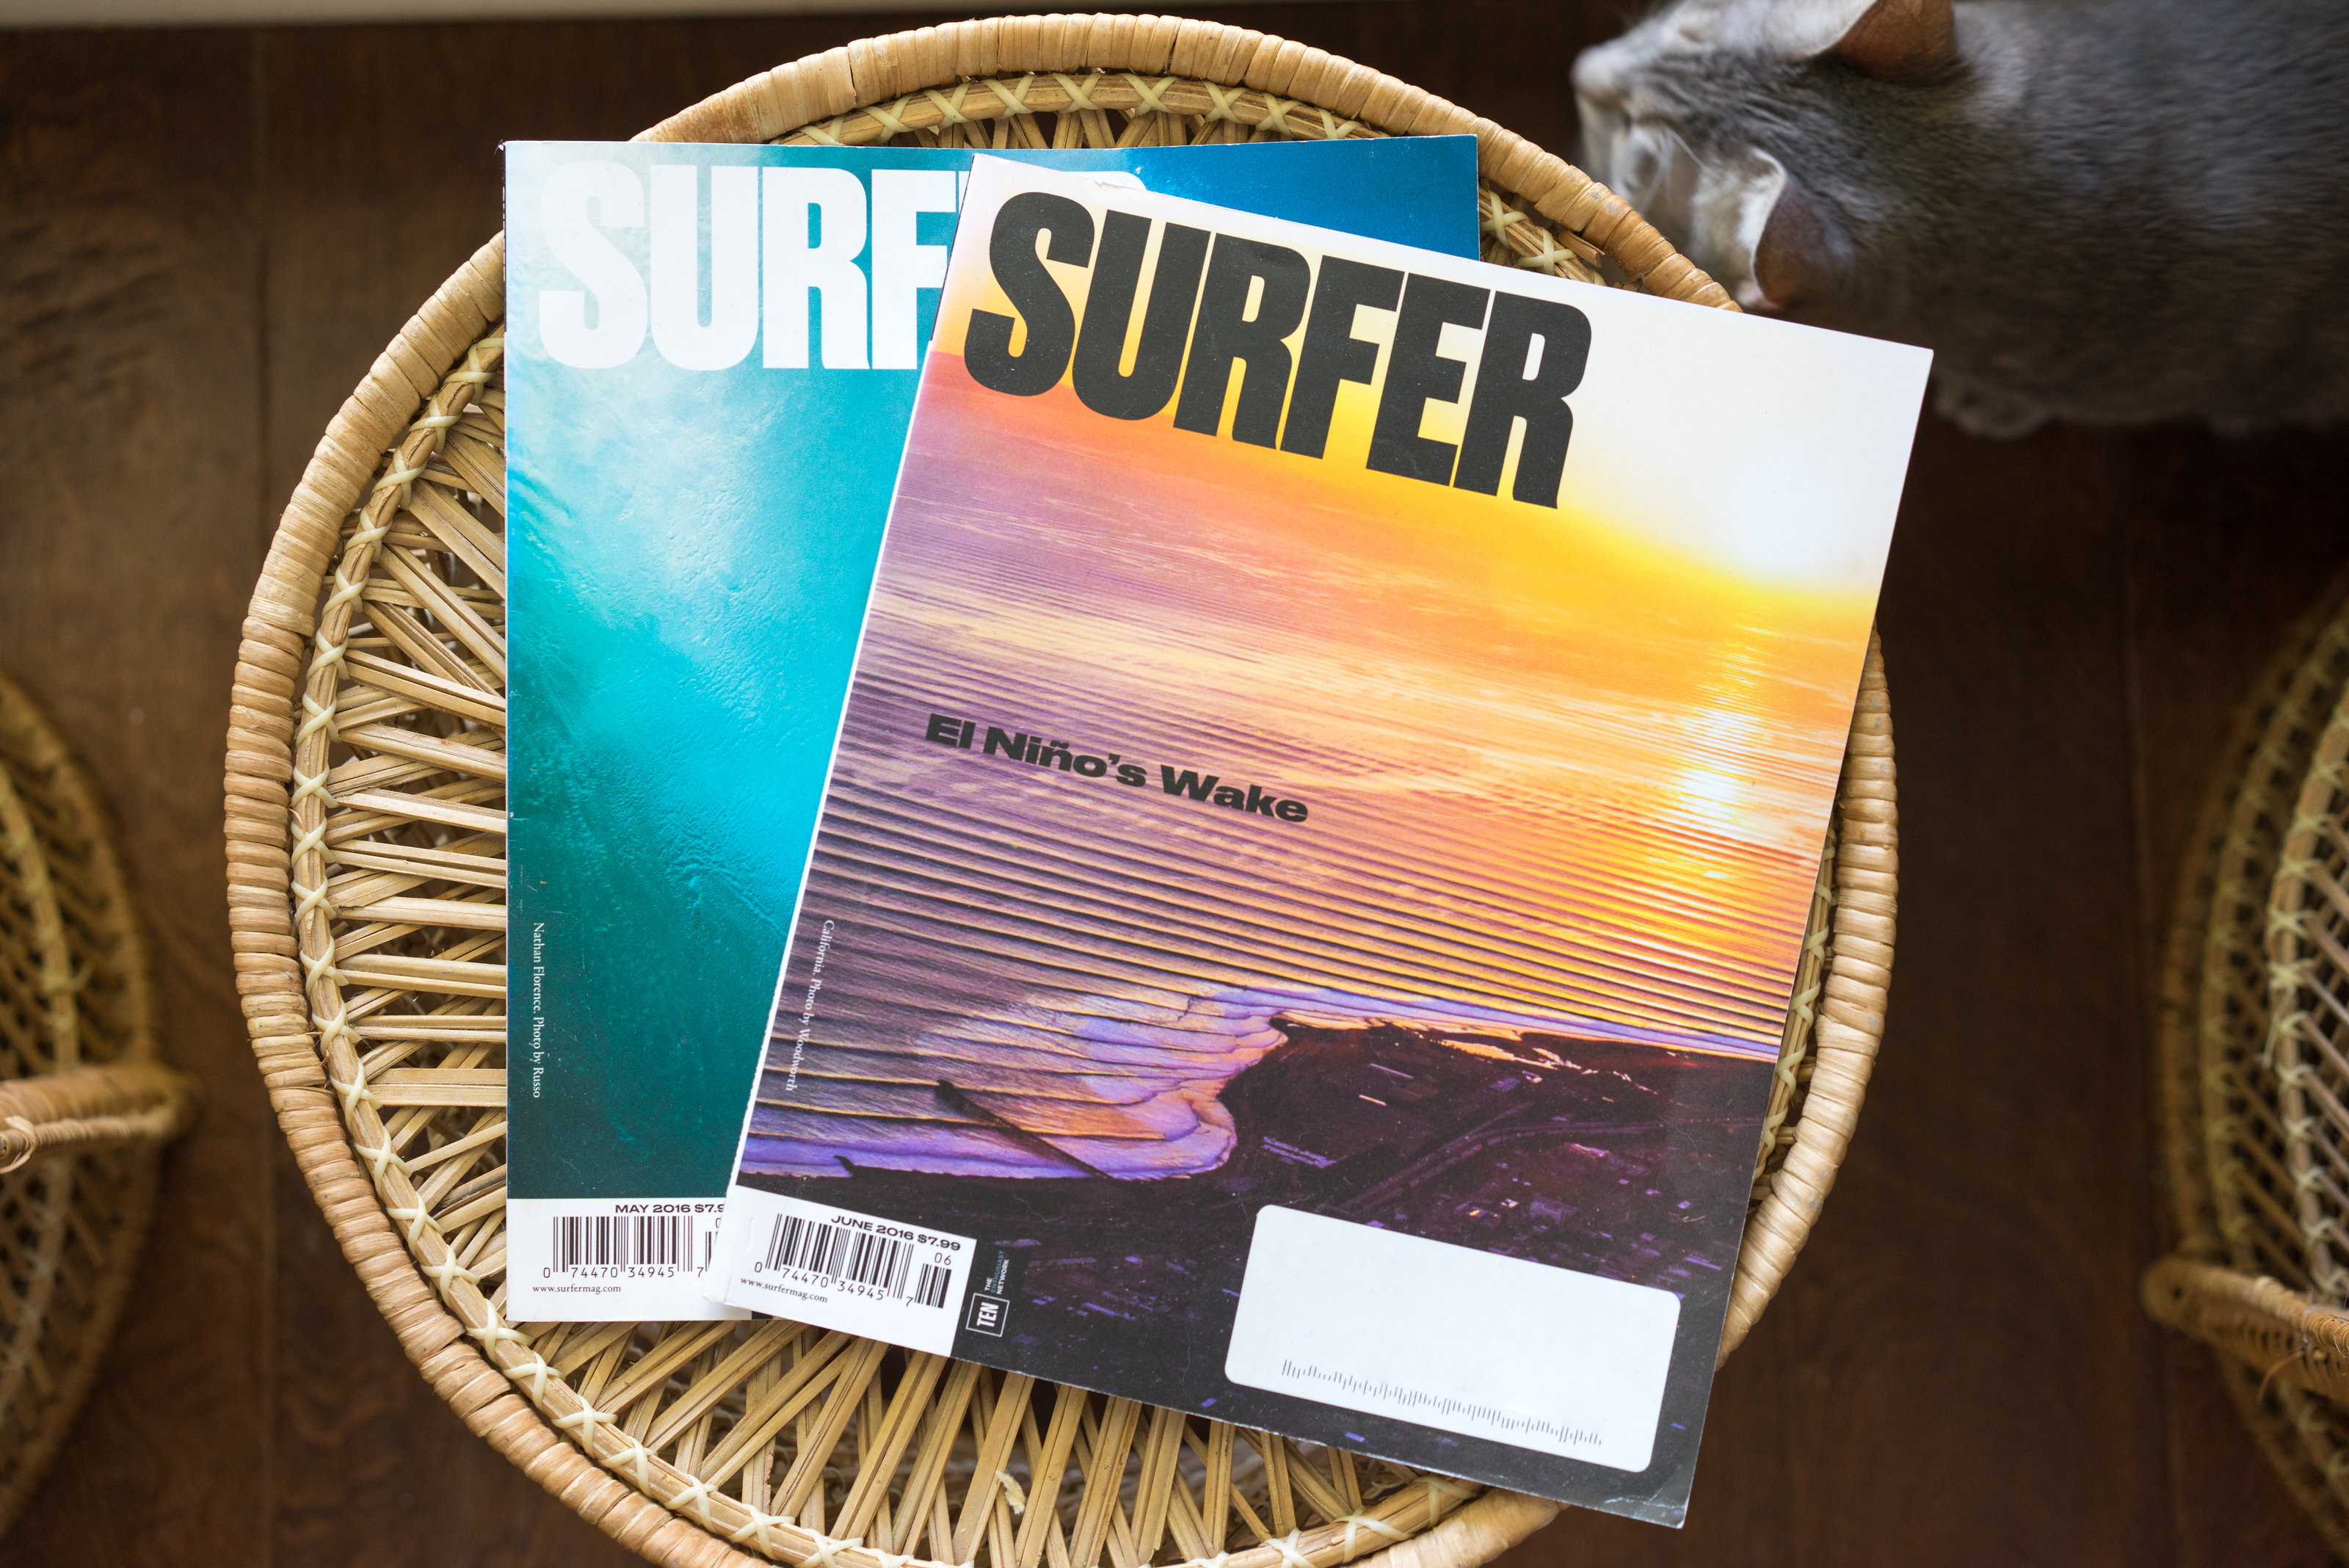 House Tour: Two issues of Surfer magazine on a side table